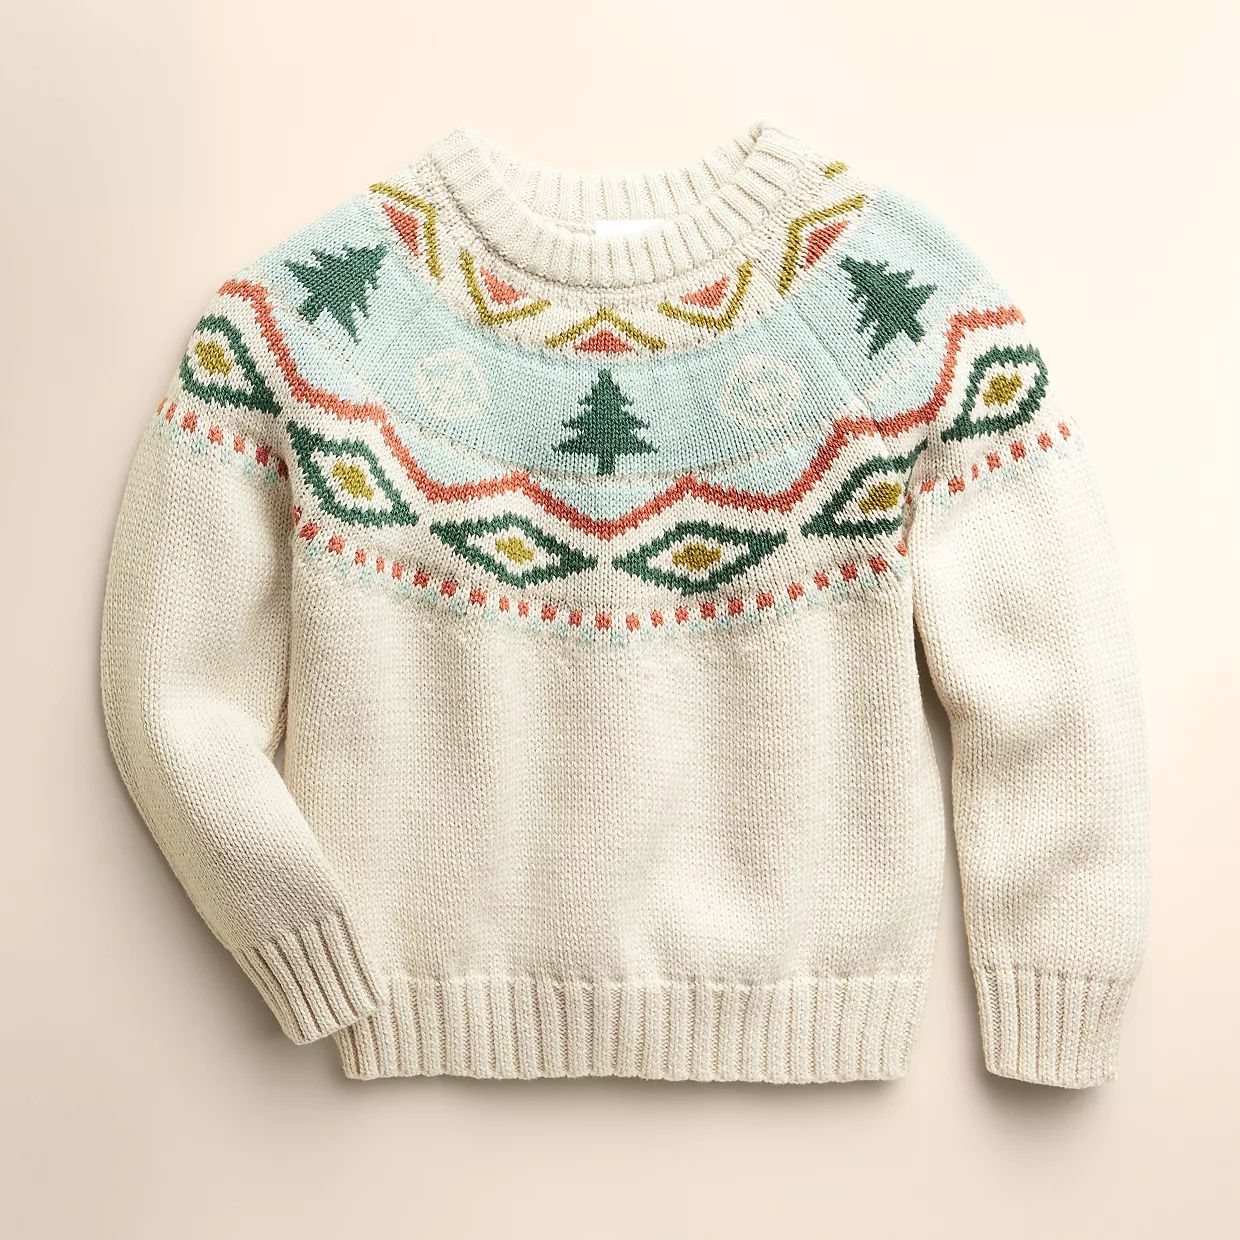 Kids 4-12 Little Co. by Lauren Conrad Holiday Sweater | Kohl's